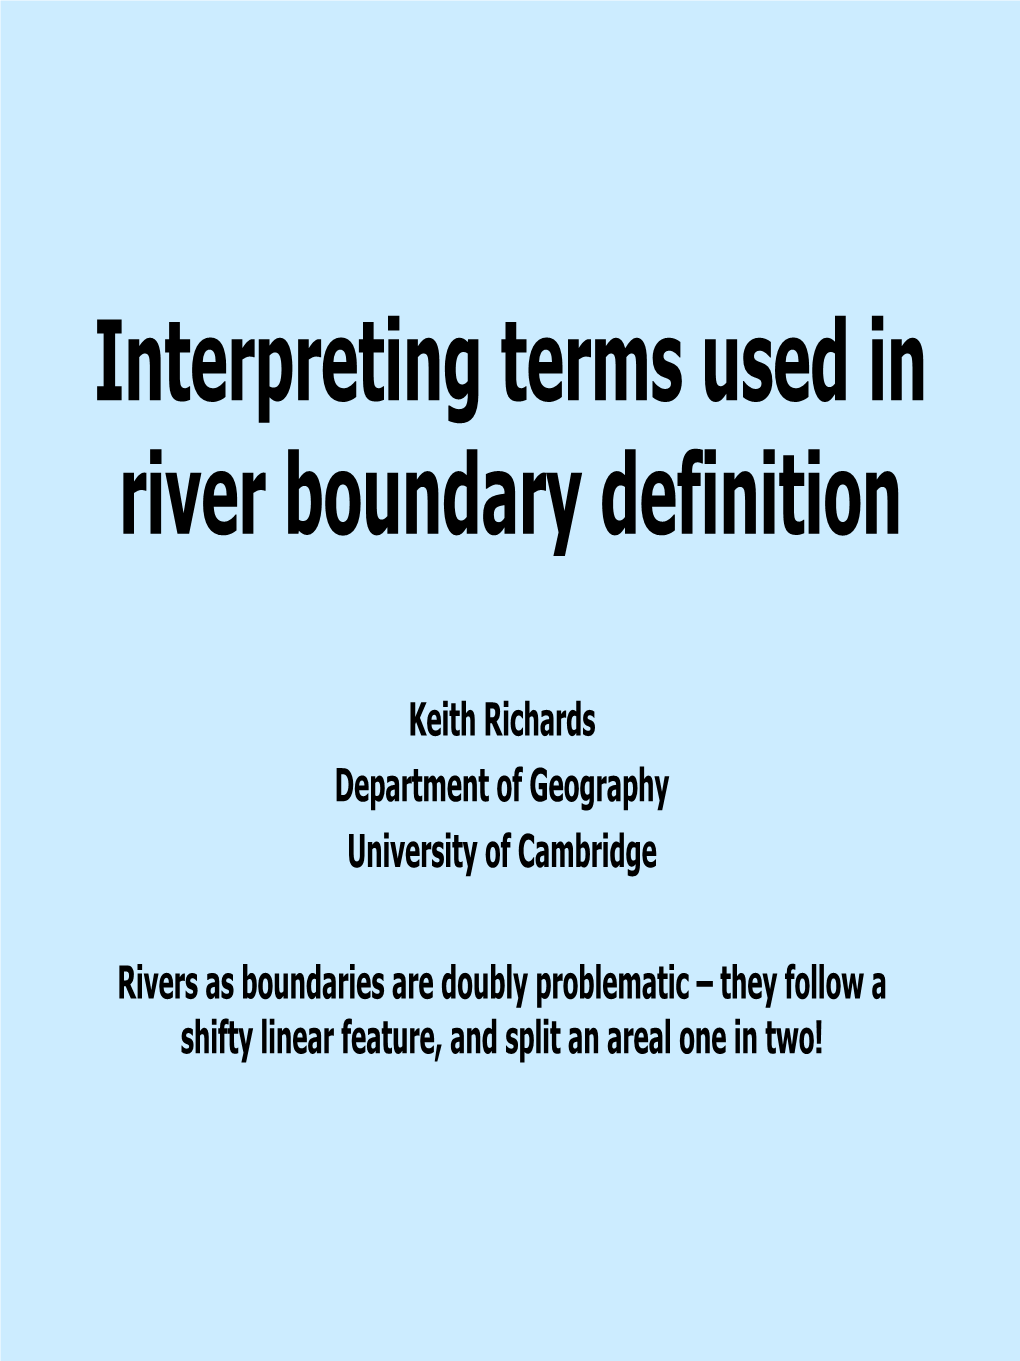 Interpreting Terms Used in River Boundary Definition